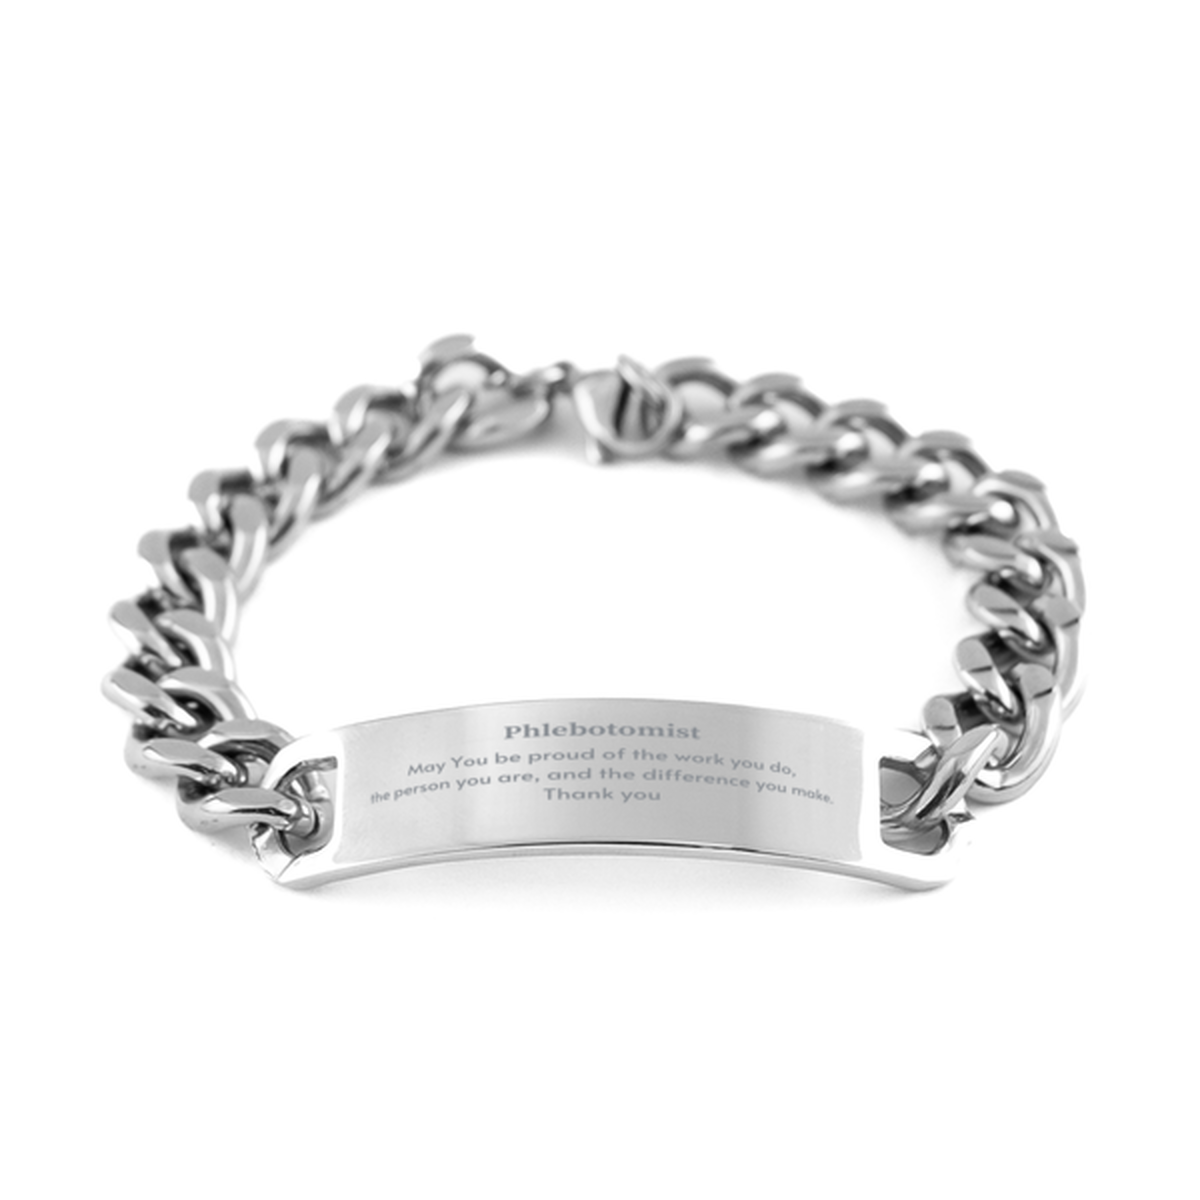 Heartwarming Cuban Chain Stainless Steel Bracelet Retirement Coworkers Gifts for Phlebotomist, Phlebotomist May You be proud of the work you do, the person you are Gifts for Boss Men Women Friends